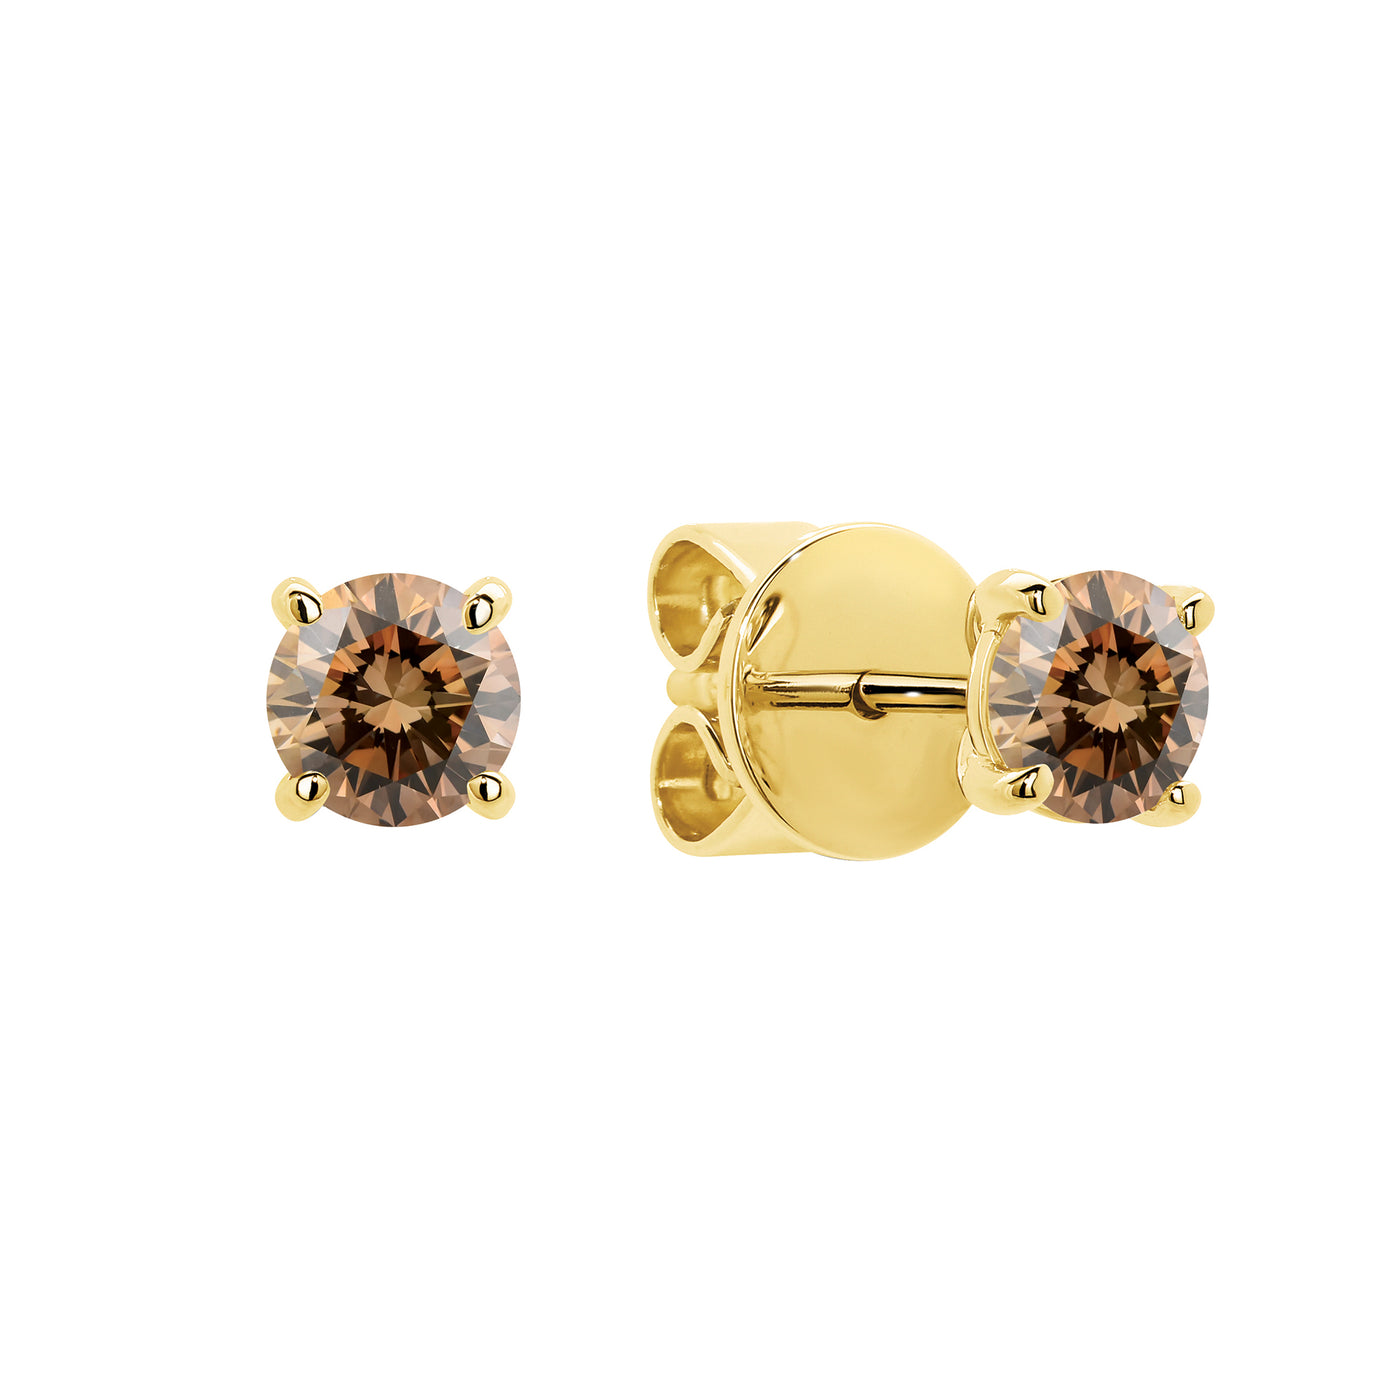 9ct yellow gold 4 Claw stud earrings featuring a RBC Australian Chocolate Diamonds in each stud.